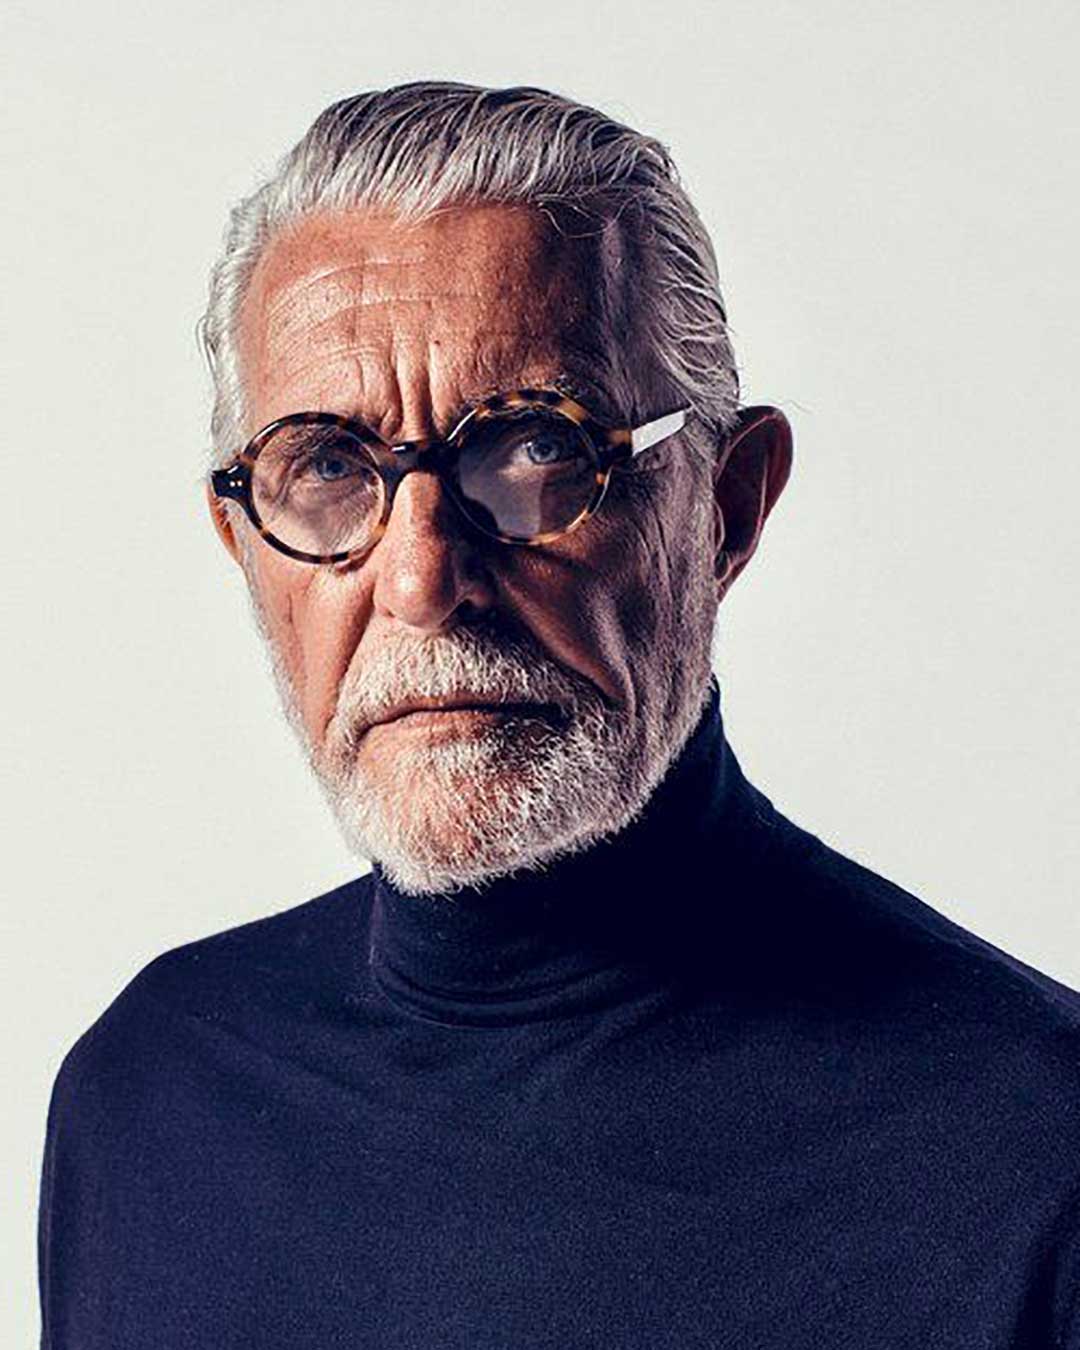 Mature man with grey hair wearing blue sweater and round tortoise spectacles